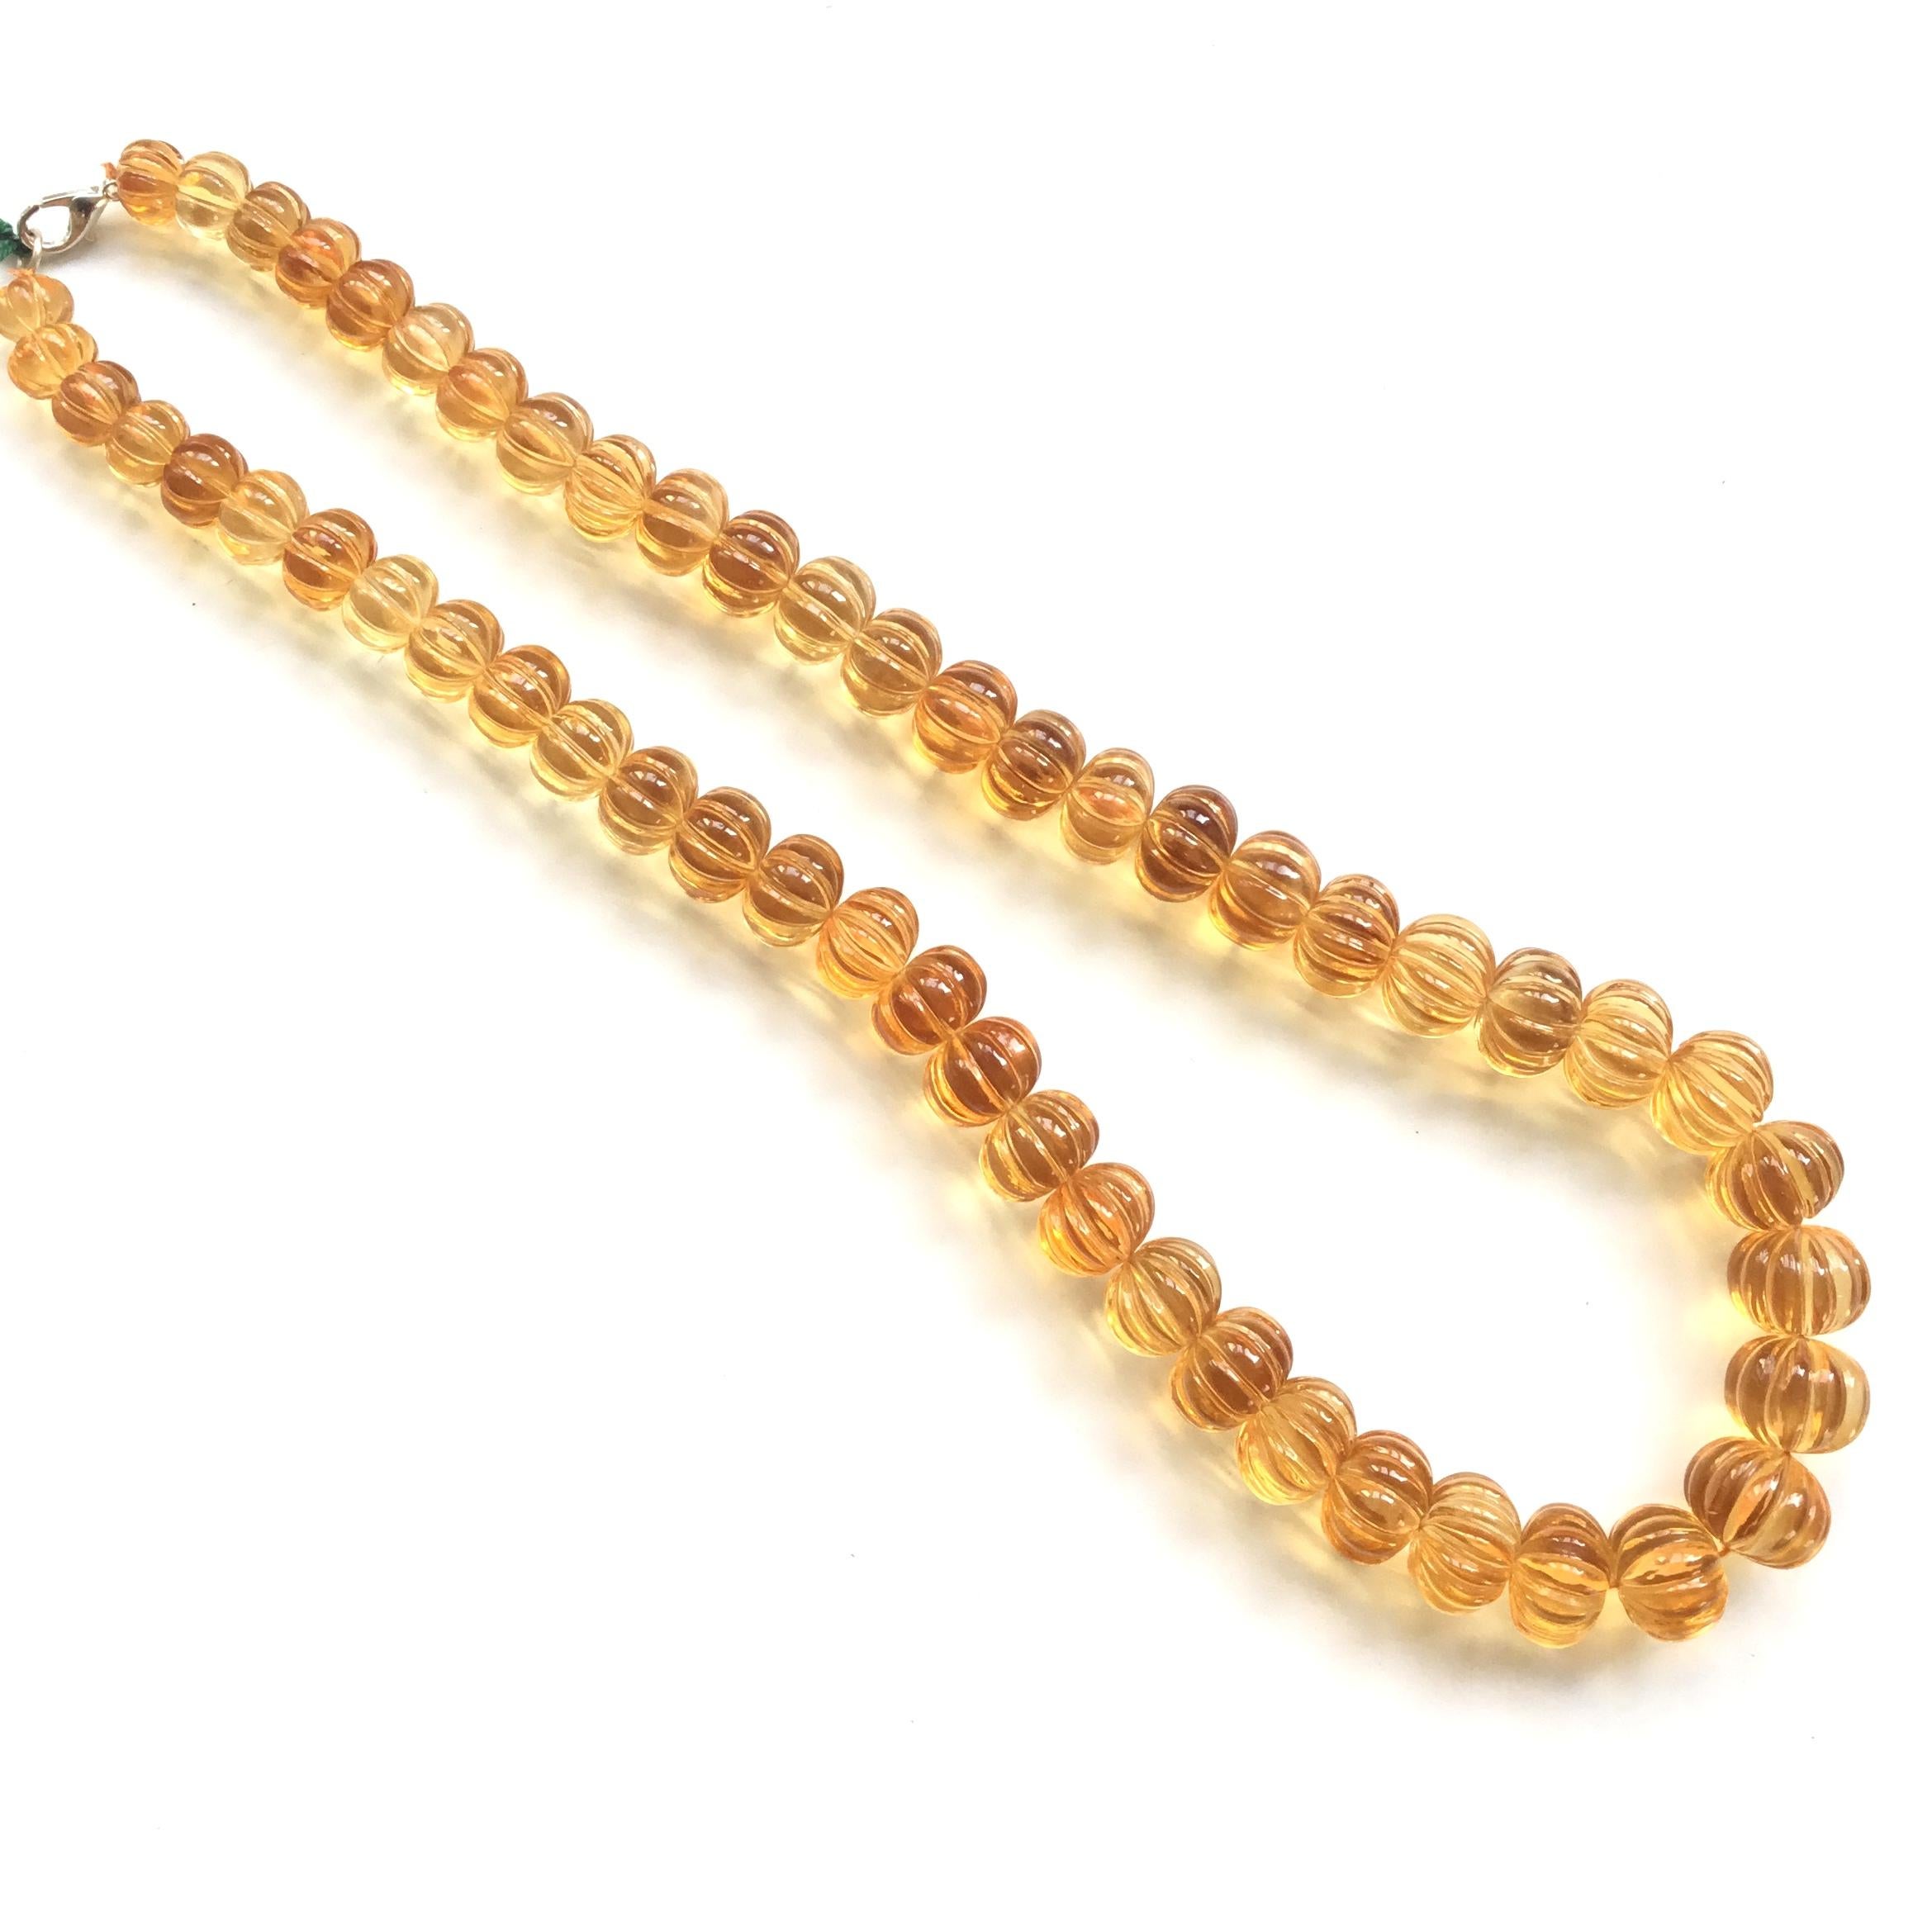 Top Quality Citrine Carved Melon Beads Natural Gemstone Necklace
Weight - 658.40 Ct
Size - 10 To 16 MM
Quantity - 1 Strand

Citrine Melon Beads Natural Gemstone Necklace .............